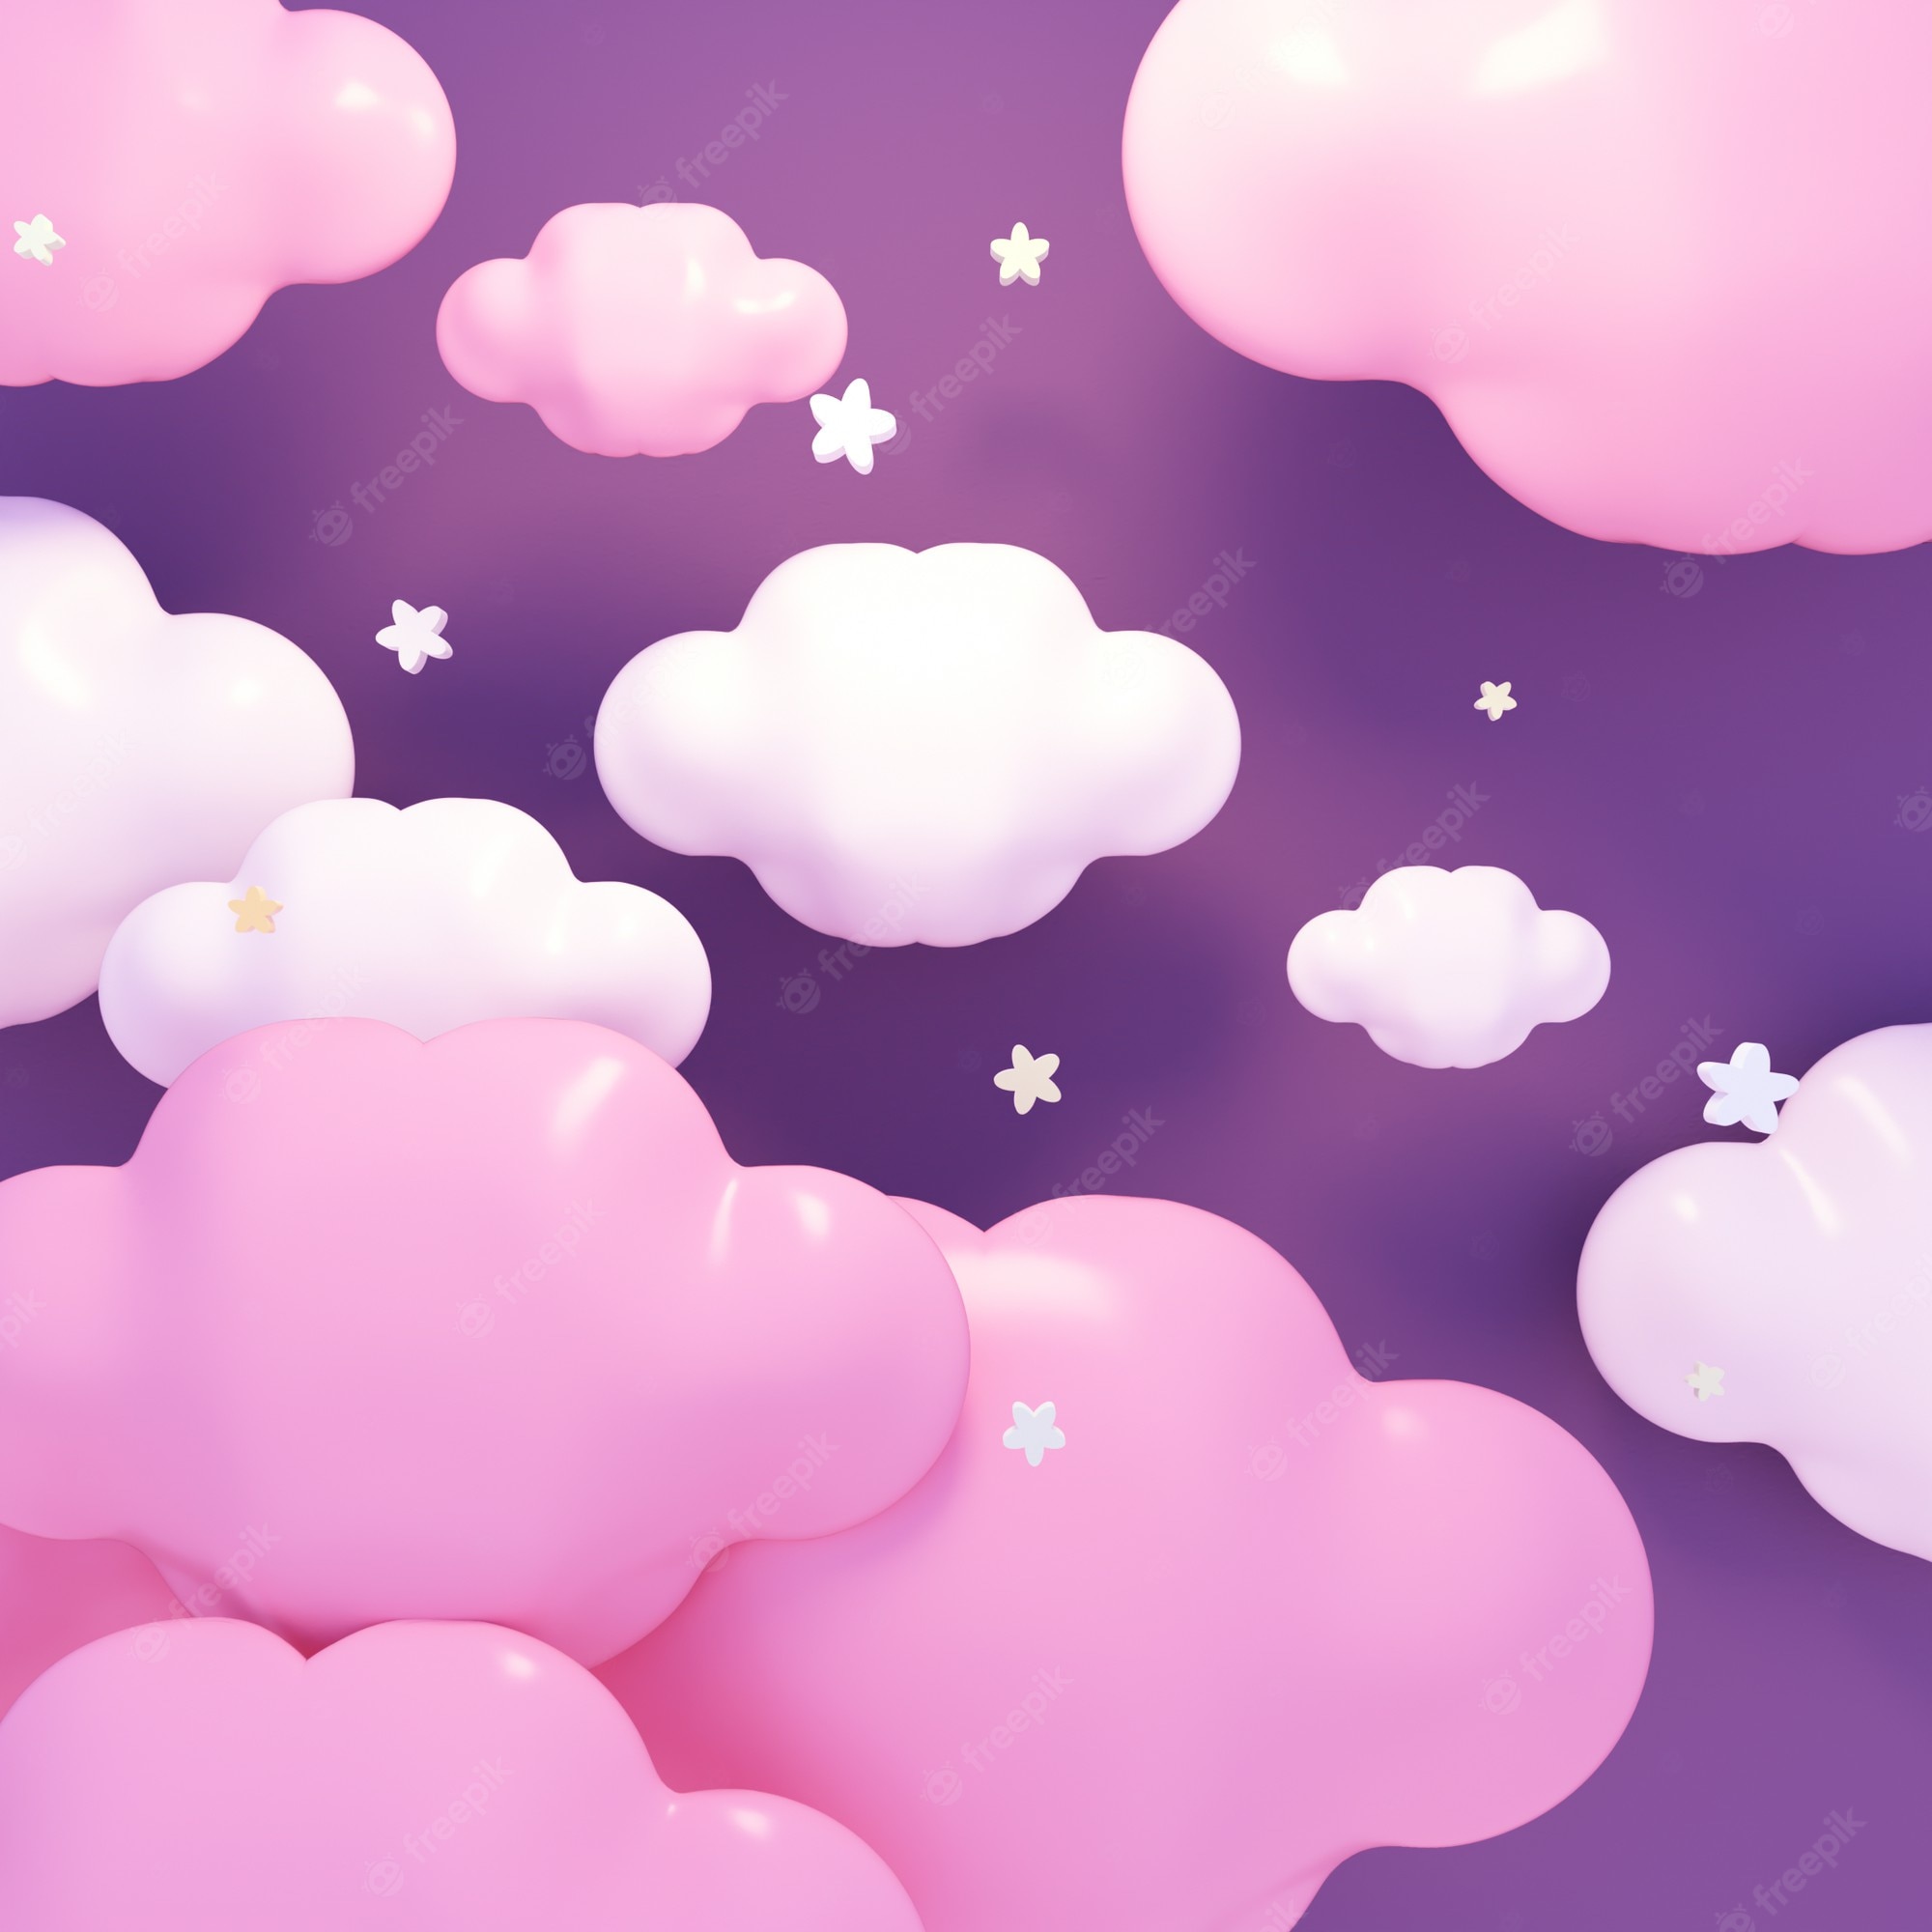 Premium Photo. Kawaii purple clouds and stars at night 3D rendered picture